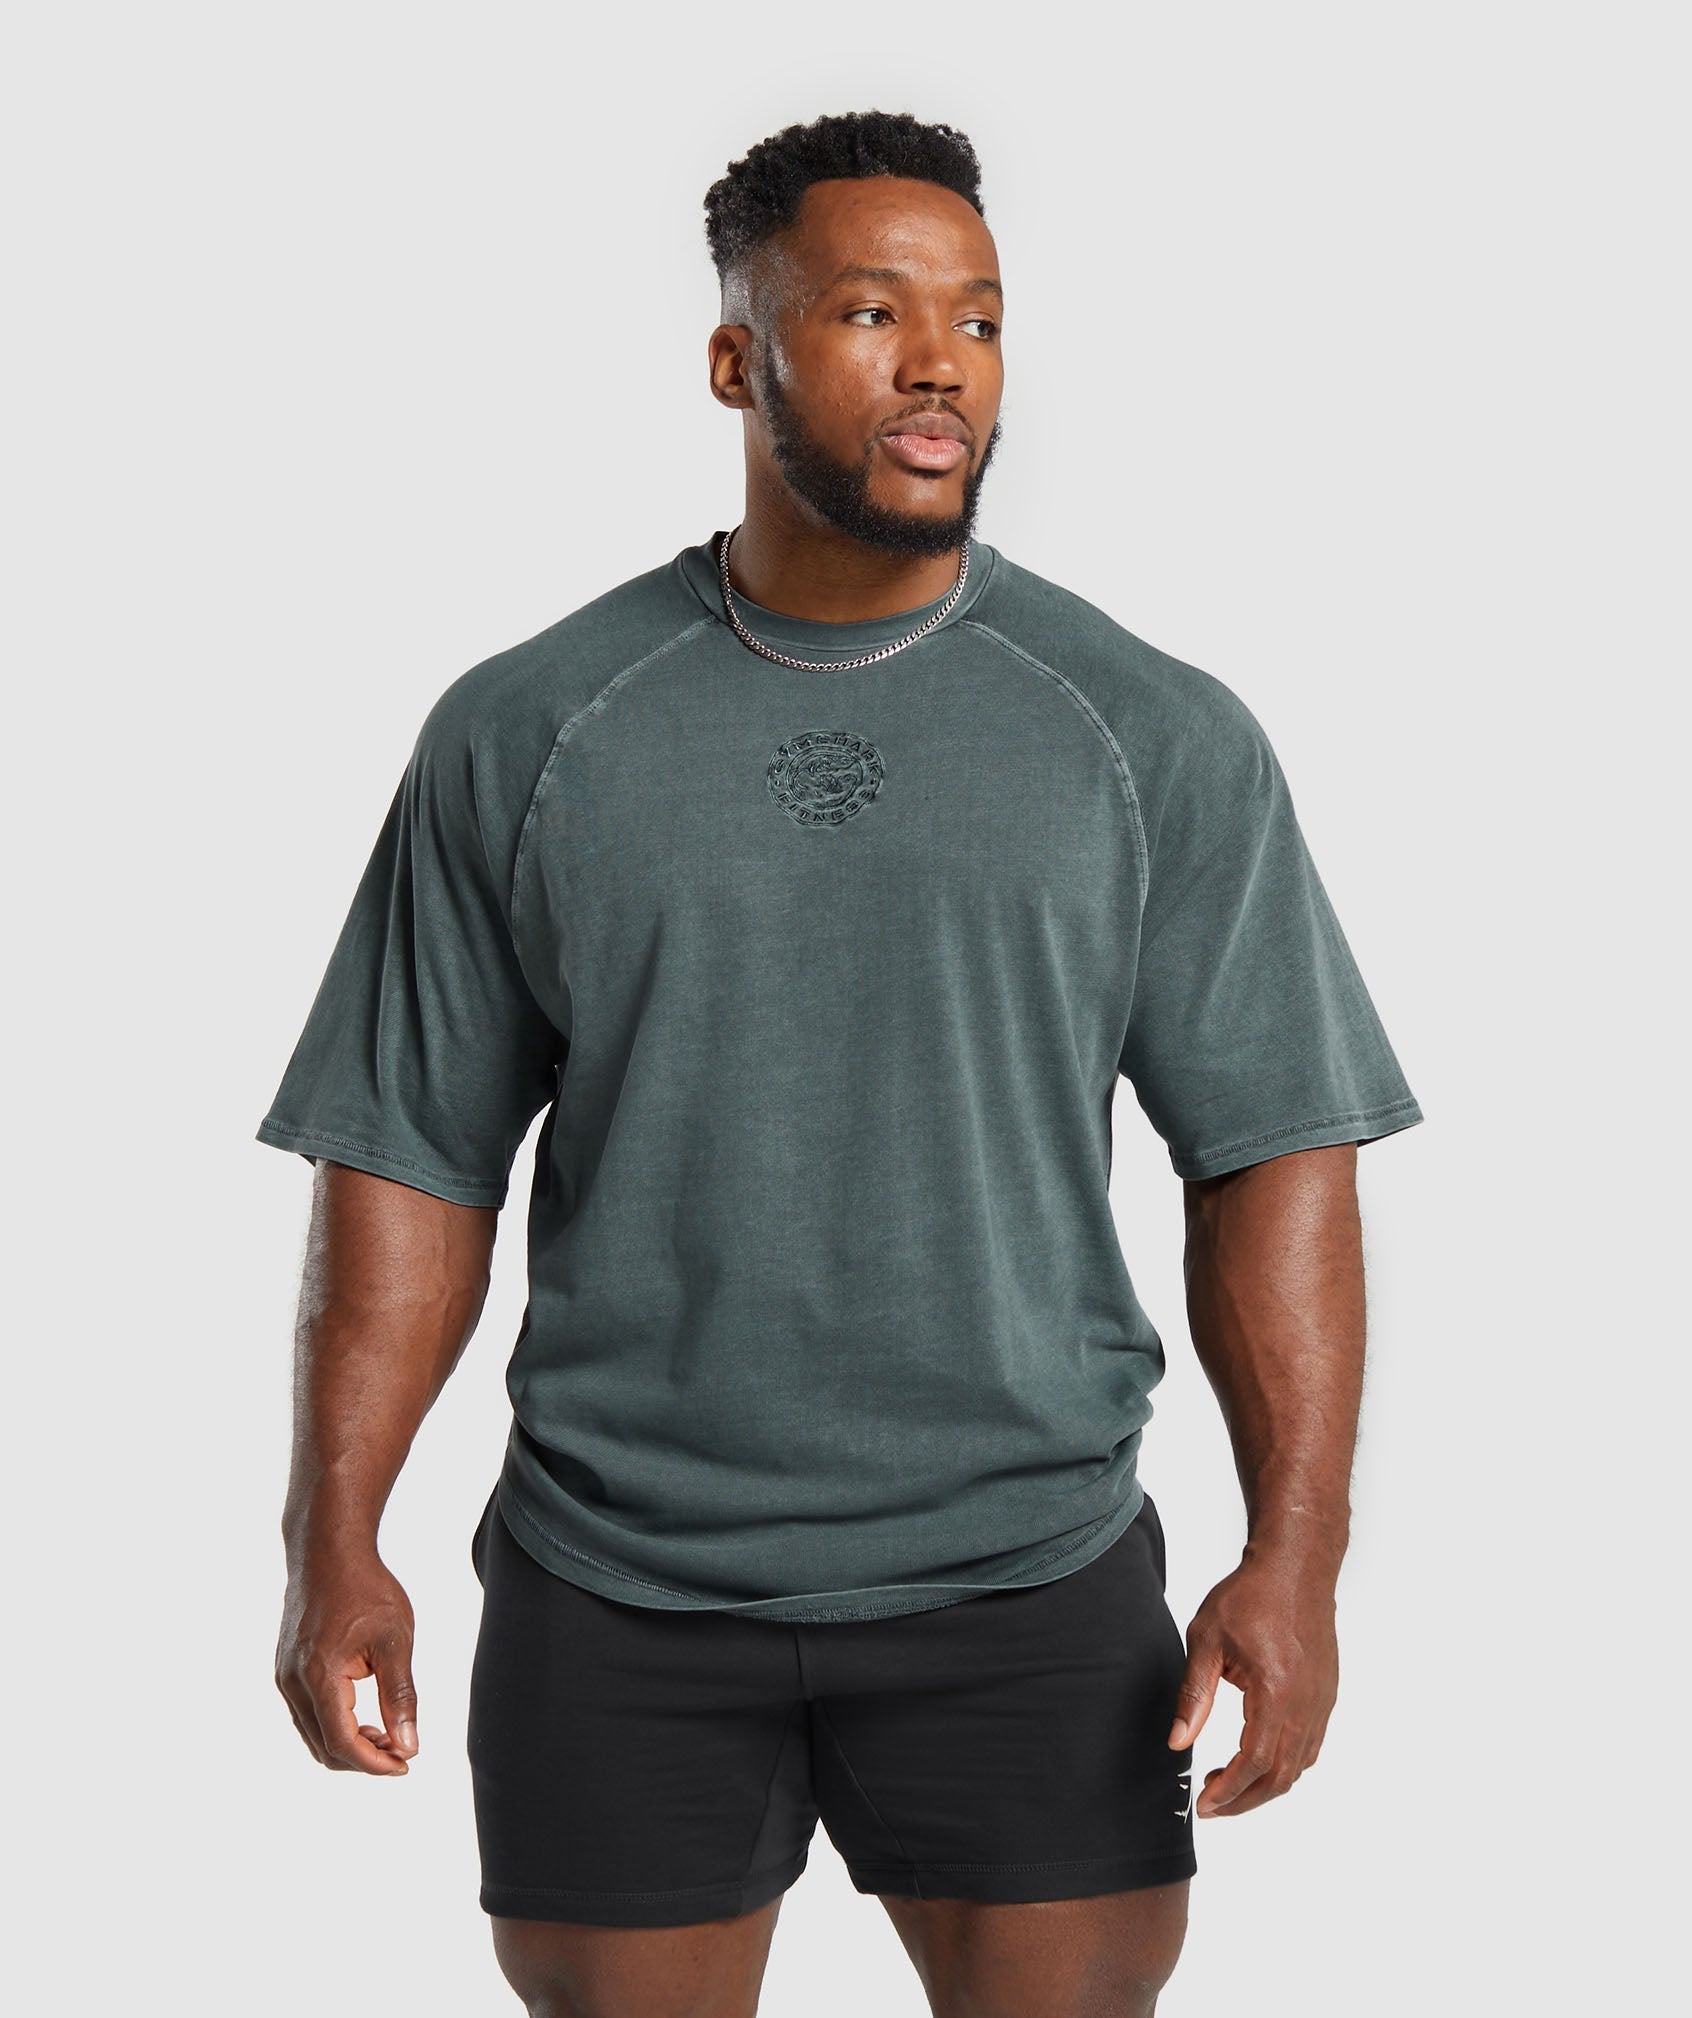 Premium Legacy T-Shirt in Cargo Teal - view 1